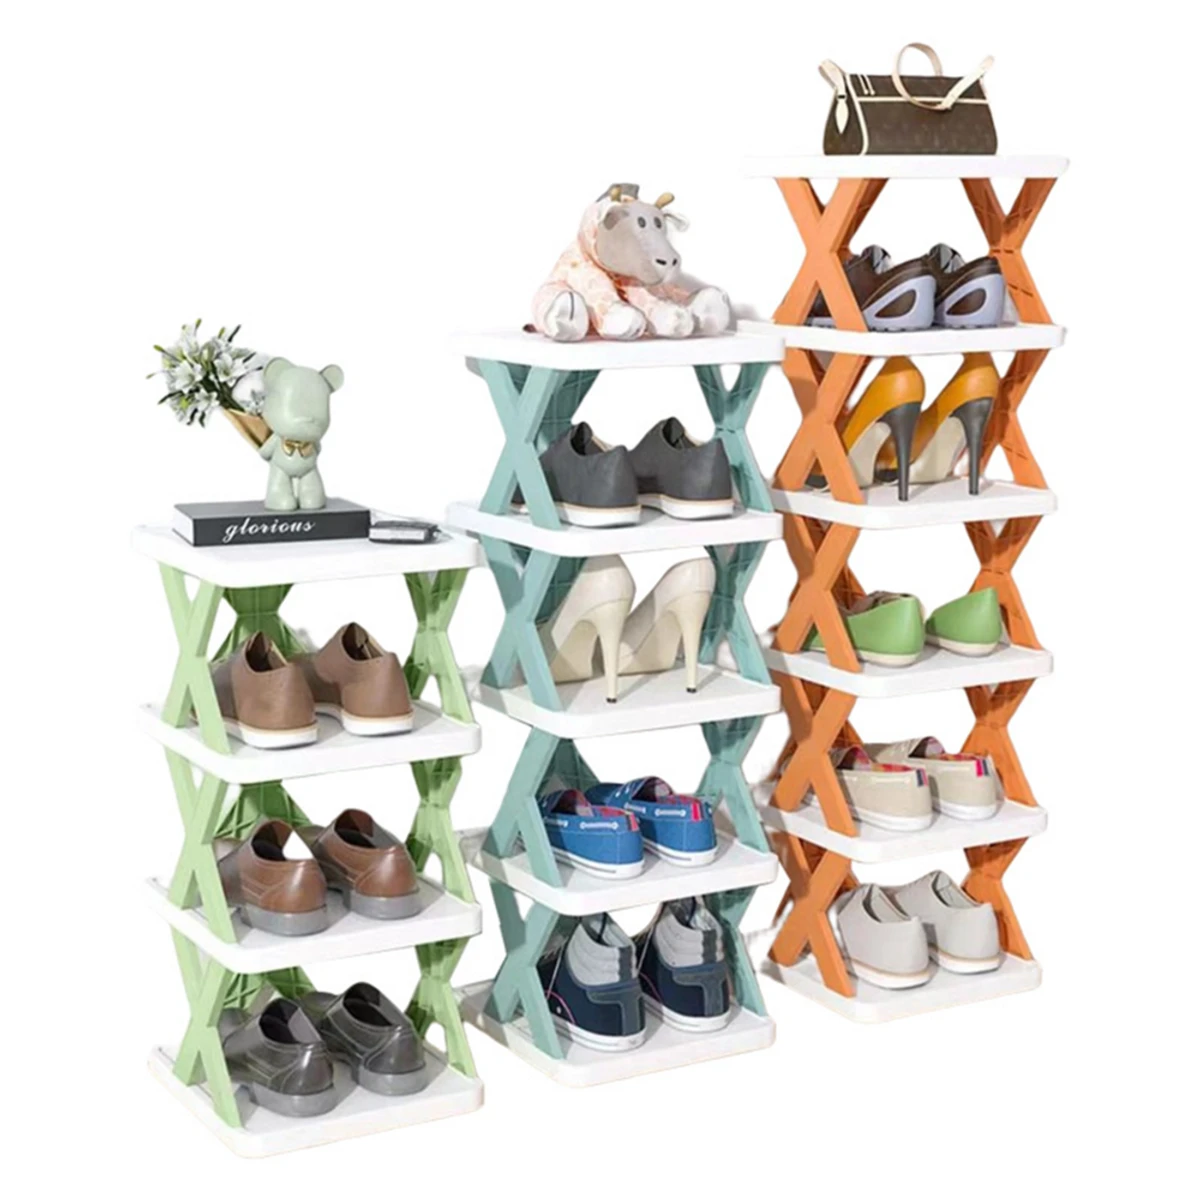 6 Line Multi-Layer Book and Shoe Rack